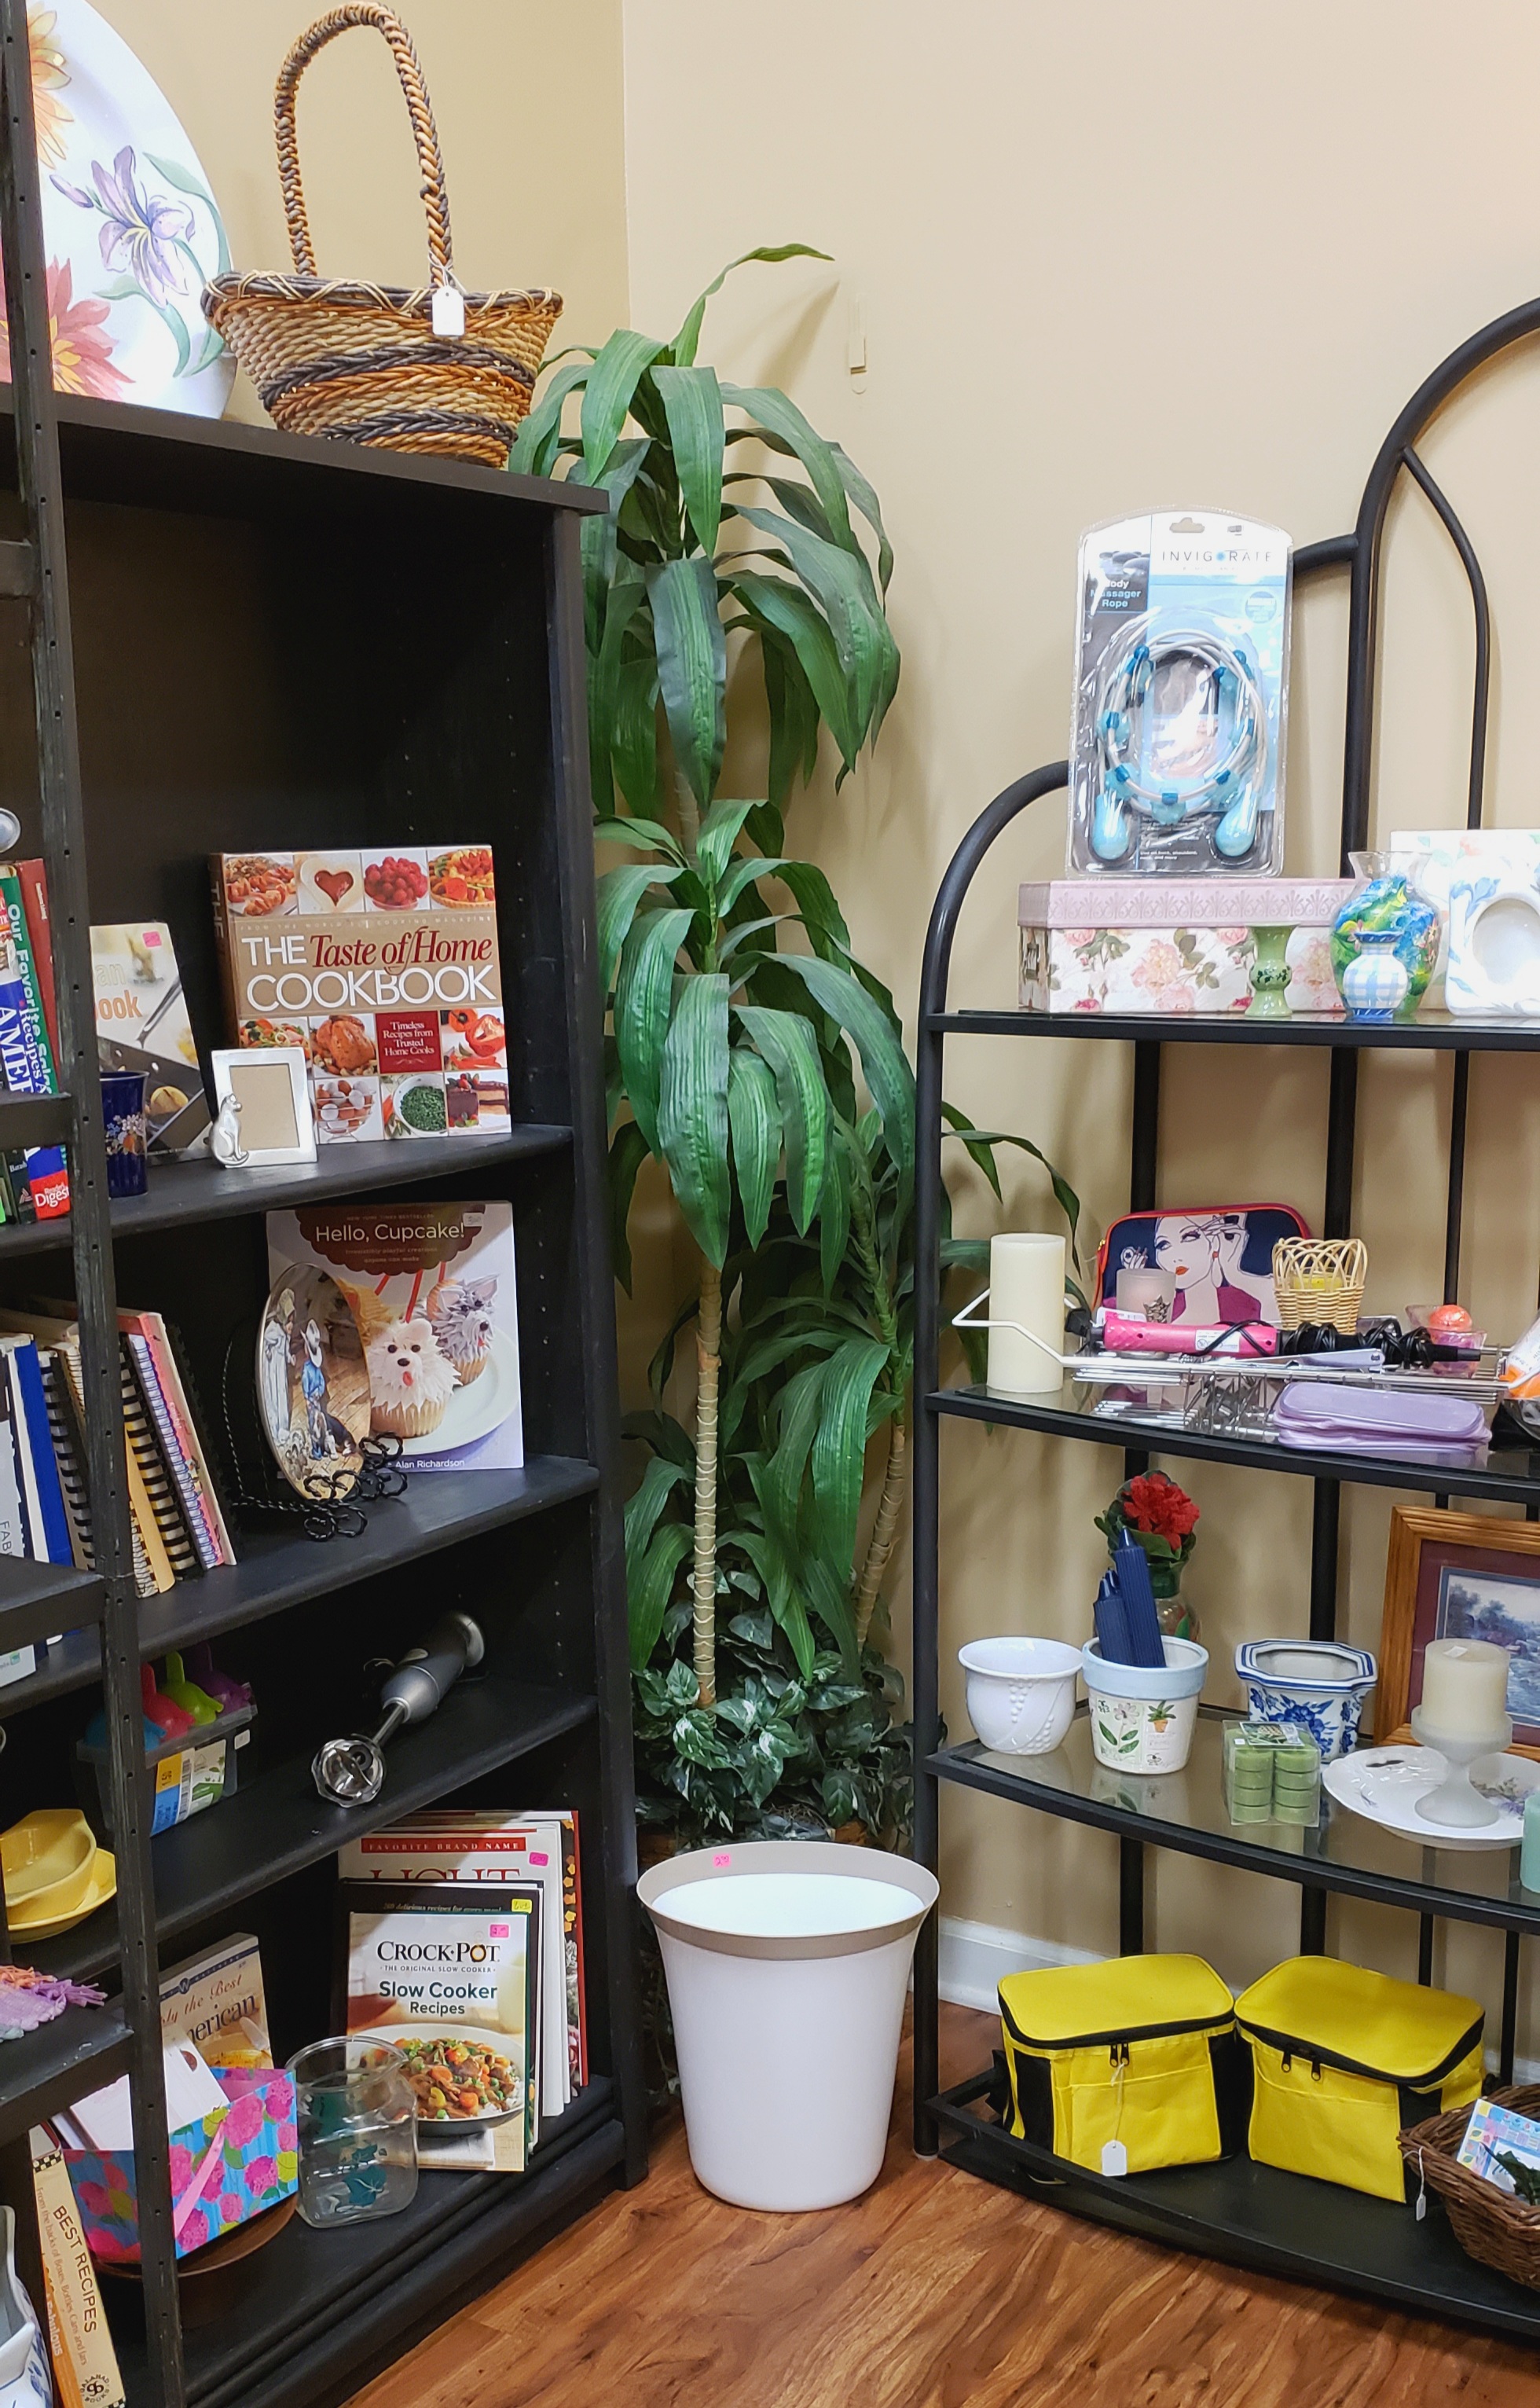 Small housewares, linens, and decorative items.